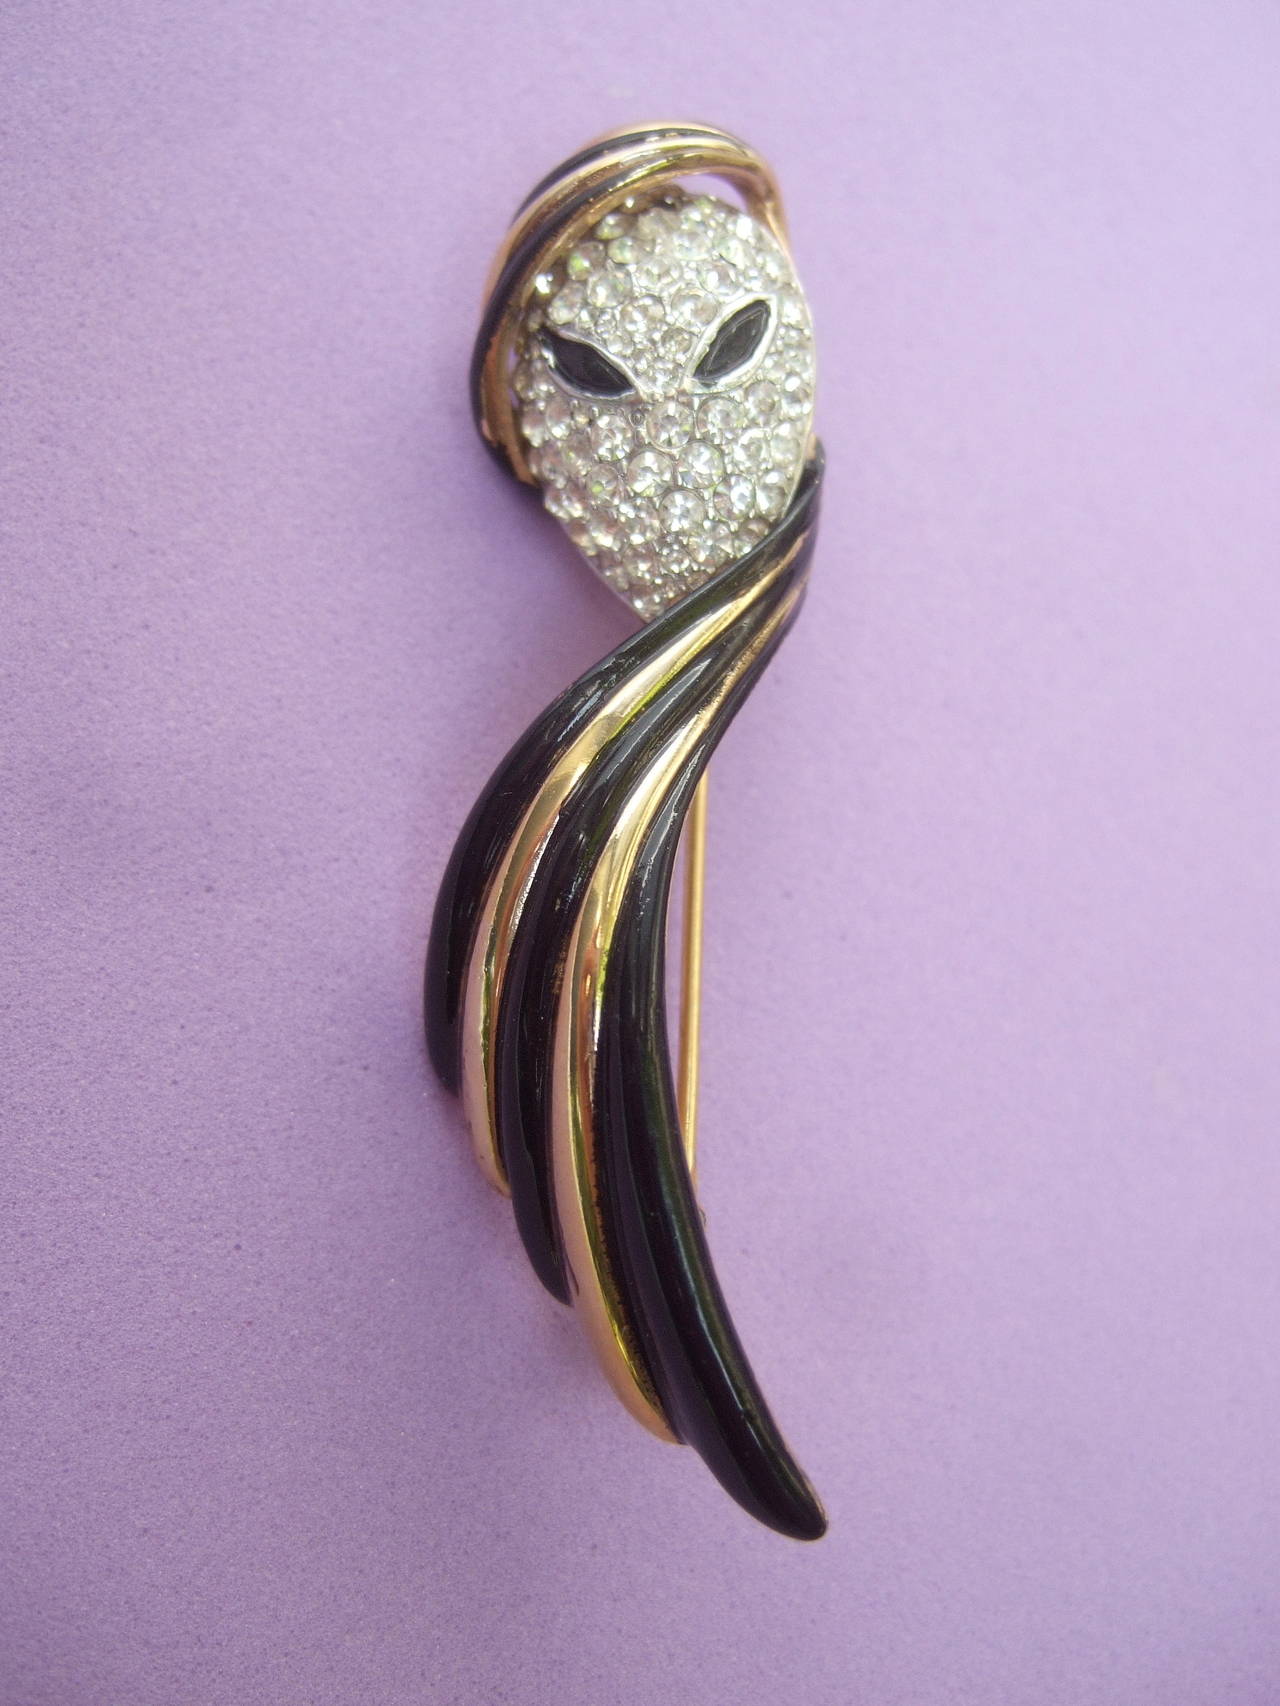 Trifari phantom of the opera figural mask brooch c 1970
The unique brooch is designed with a mysterious 
figure encrusted with glittering diamante crystals
covering the face

The stylish figure is wearing a black enamel turban 
with sleek gilt